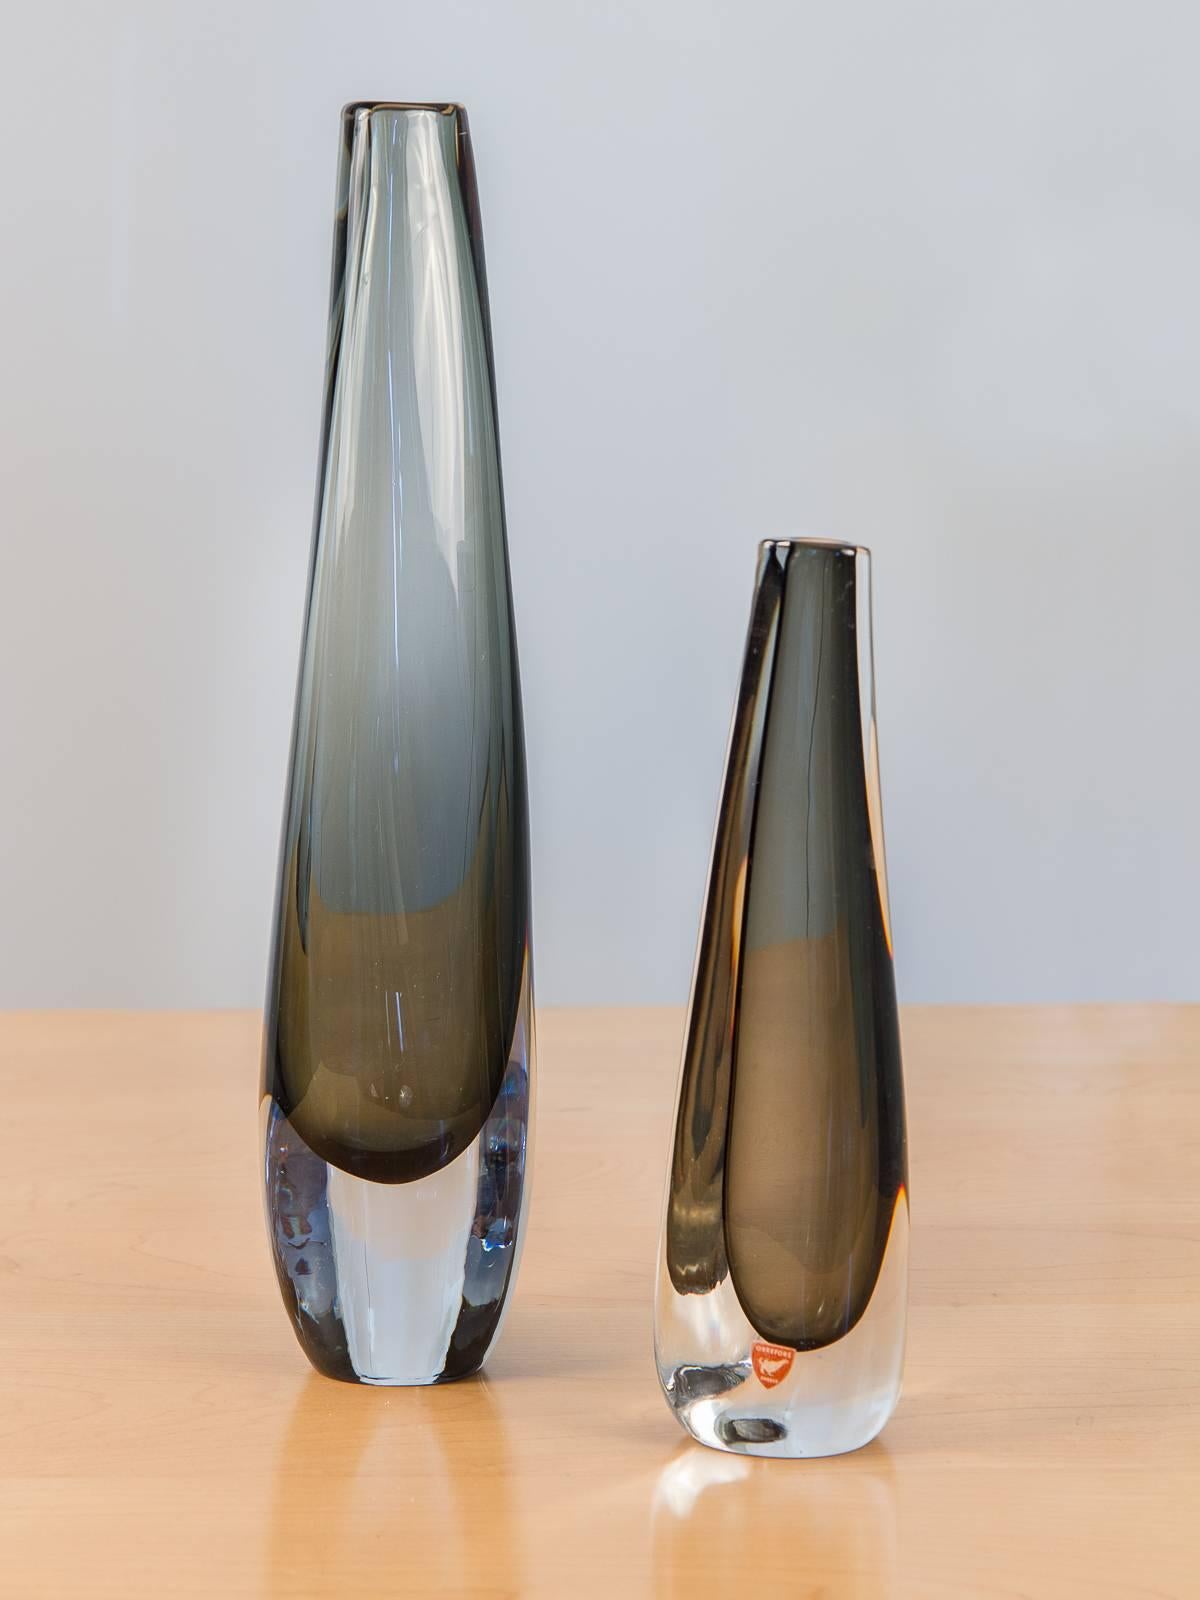 Two elegantly tall, handblown glass vases designed by Nils Landberg in 1956 for Orrefors. A delicate, sultry example of Scandinavian modern table top elements. Hand etched signage on the underside.

Smaller vase measures 2